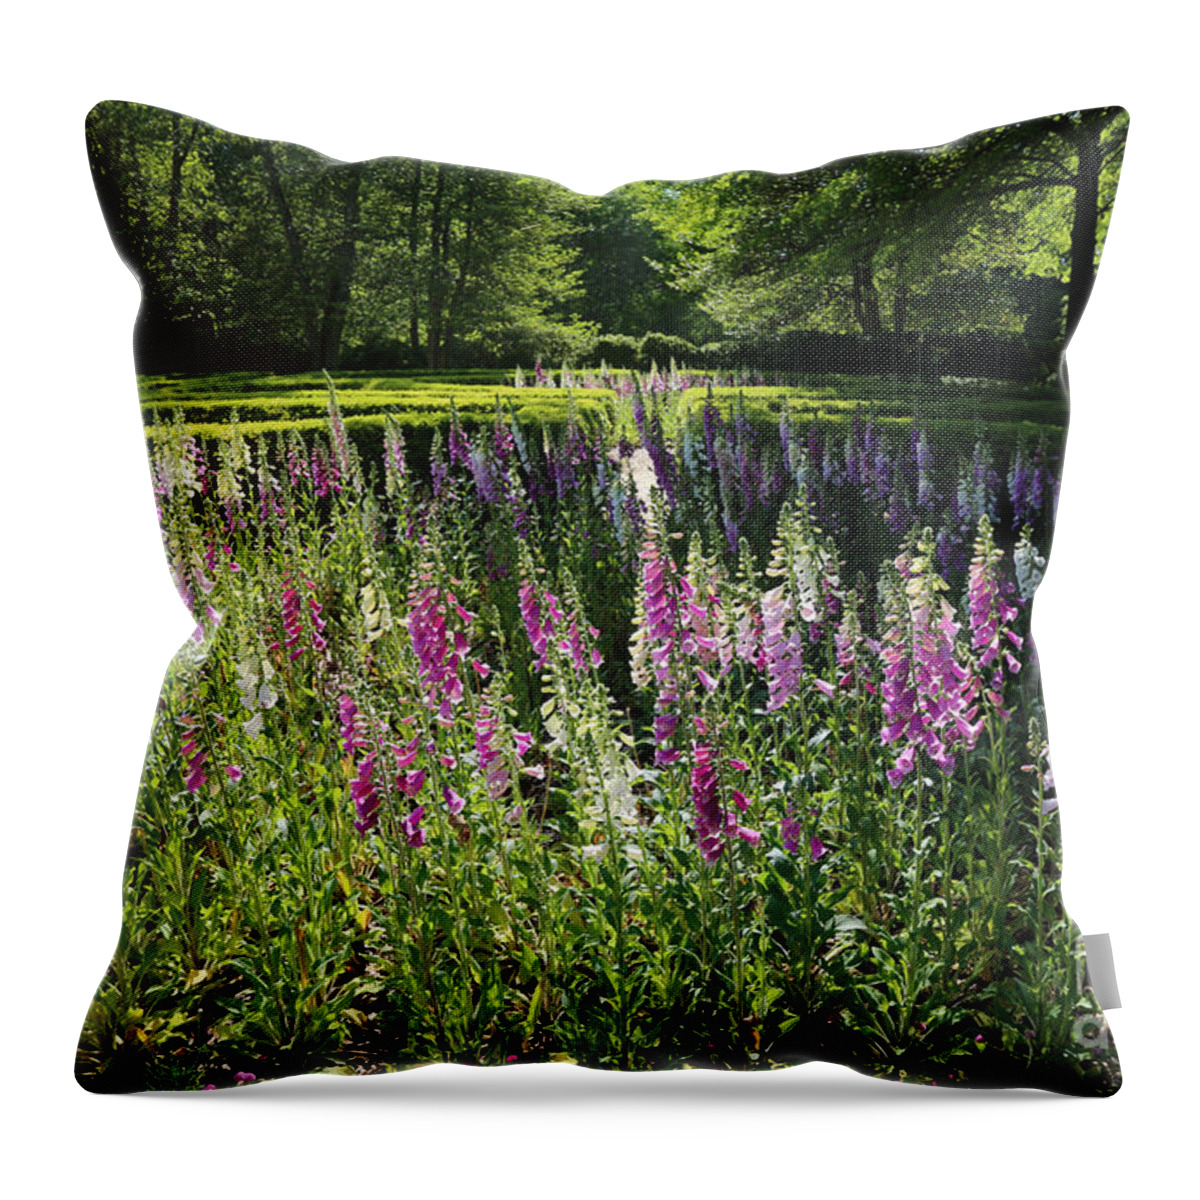 Governor's Palace Throw Pillow featuring the photograph Garden Foxgloves by Lara Morrison